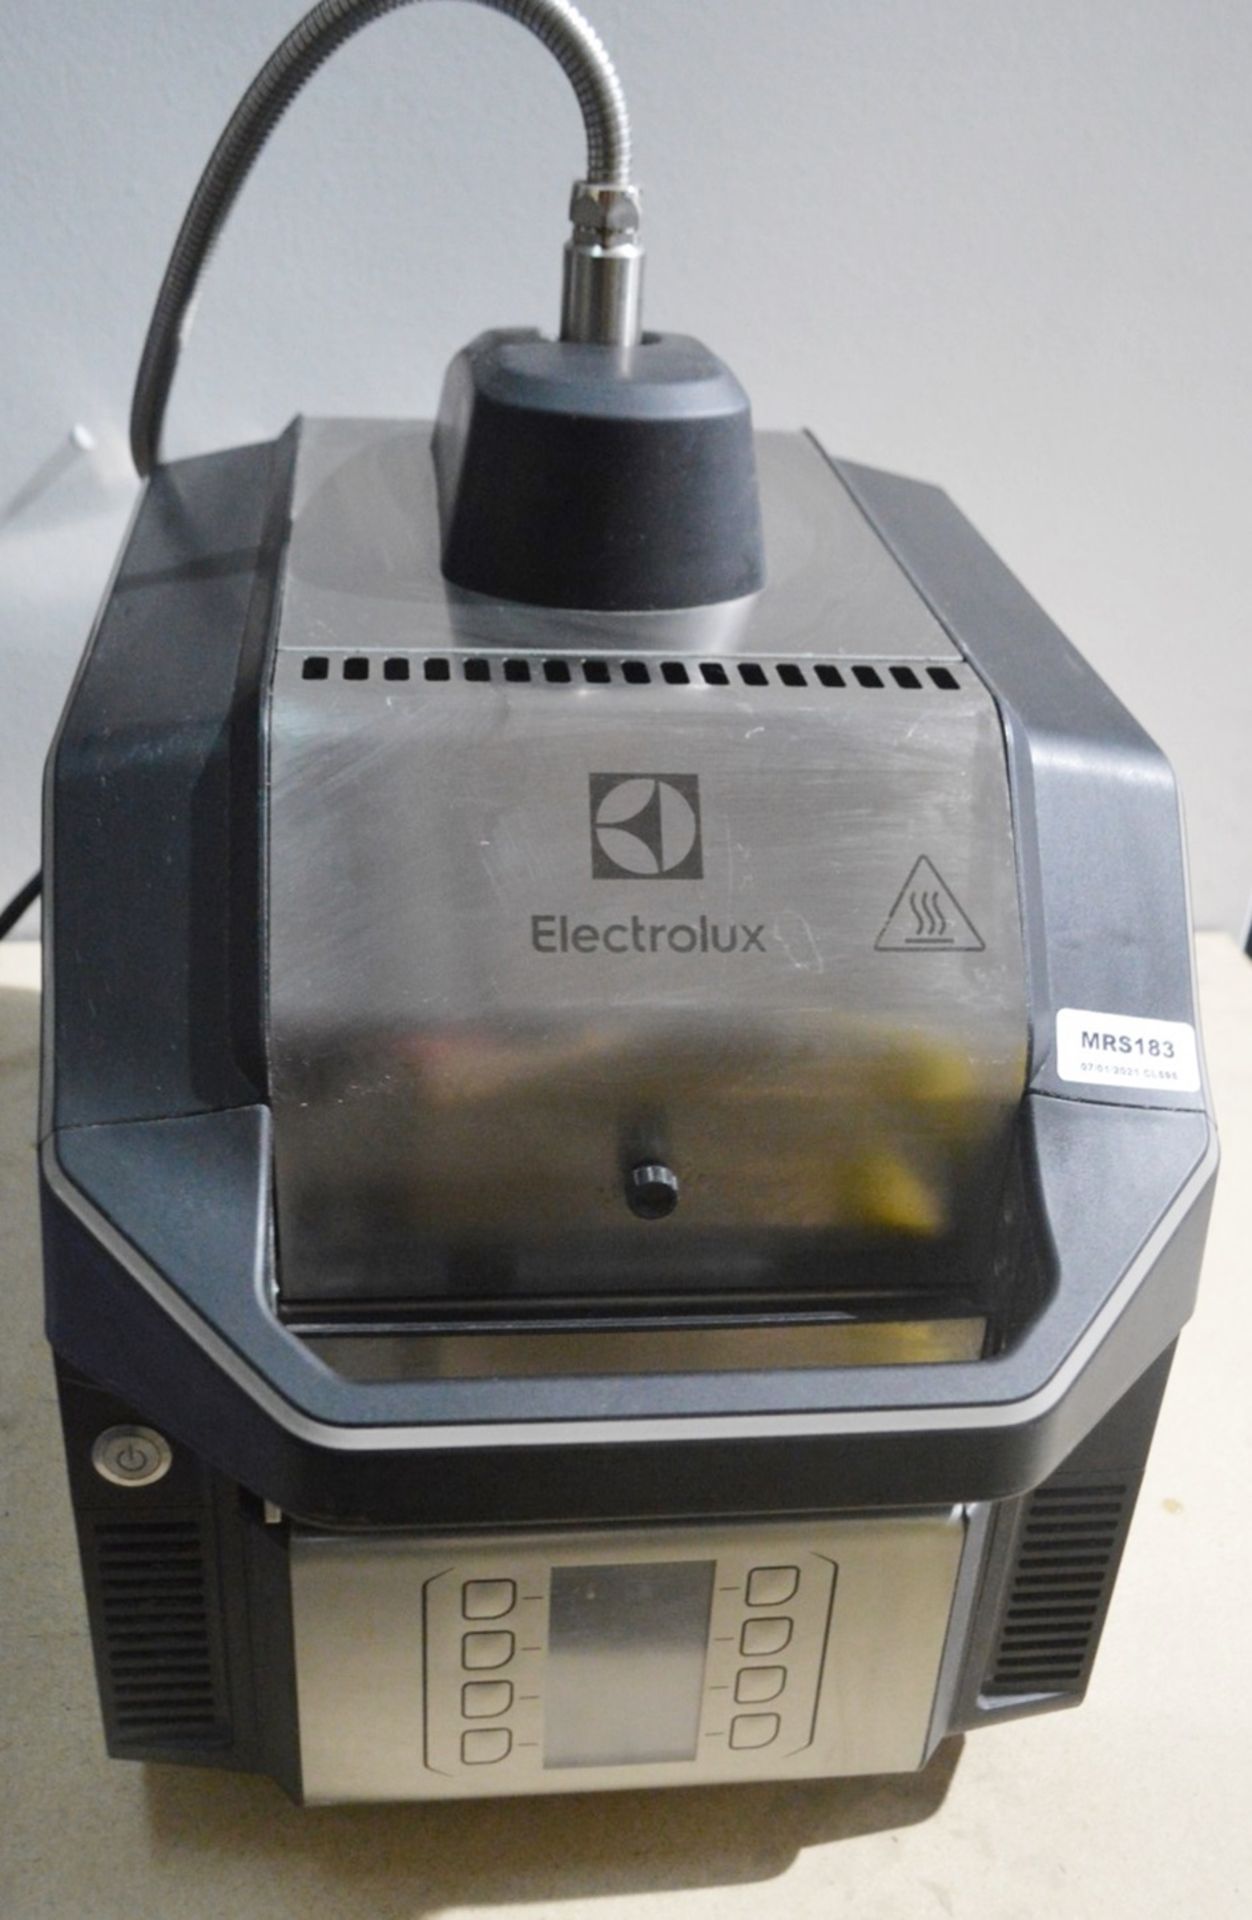 1 x Electrolux SpeeDelight Commercial High Speed Electric Panini Grill - Original RRP £8,639 - - Image 14 of 14